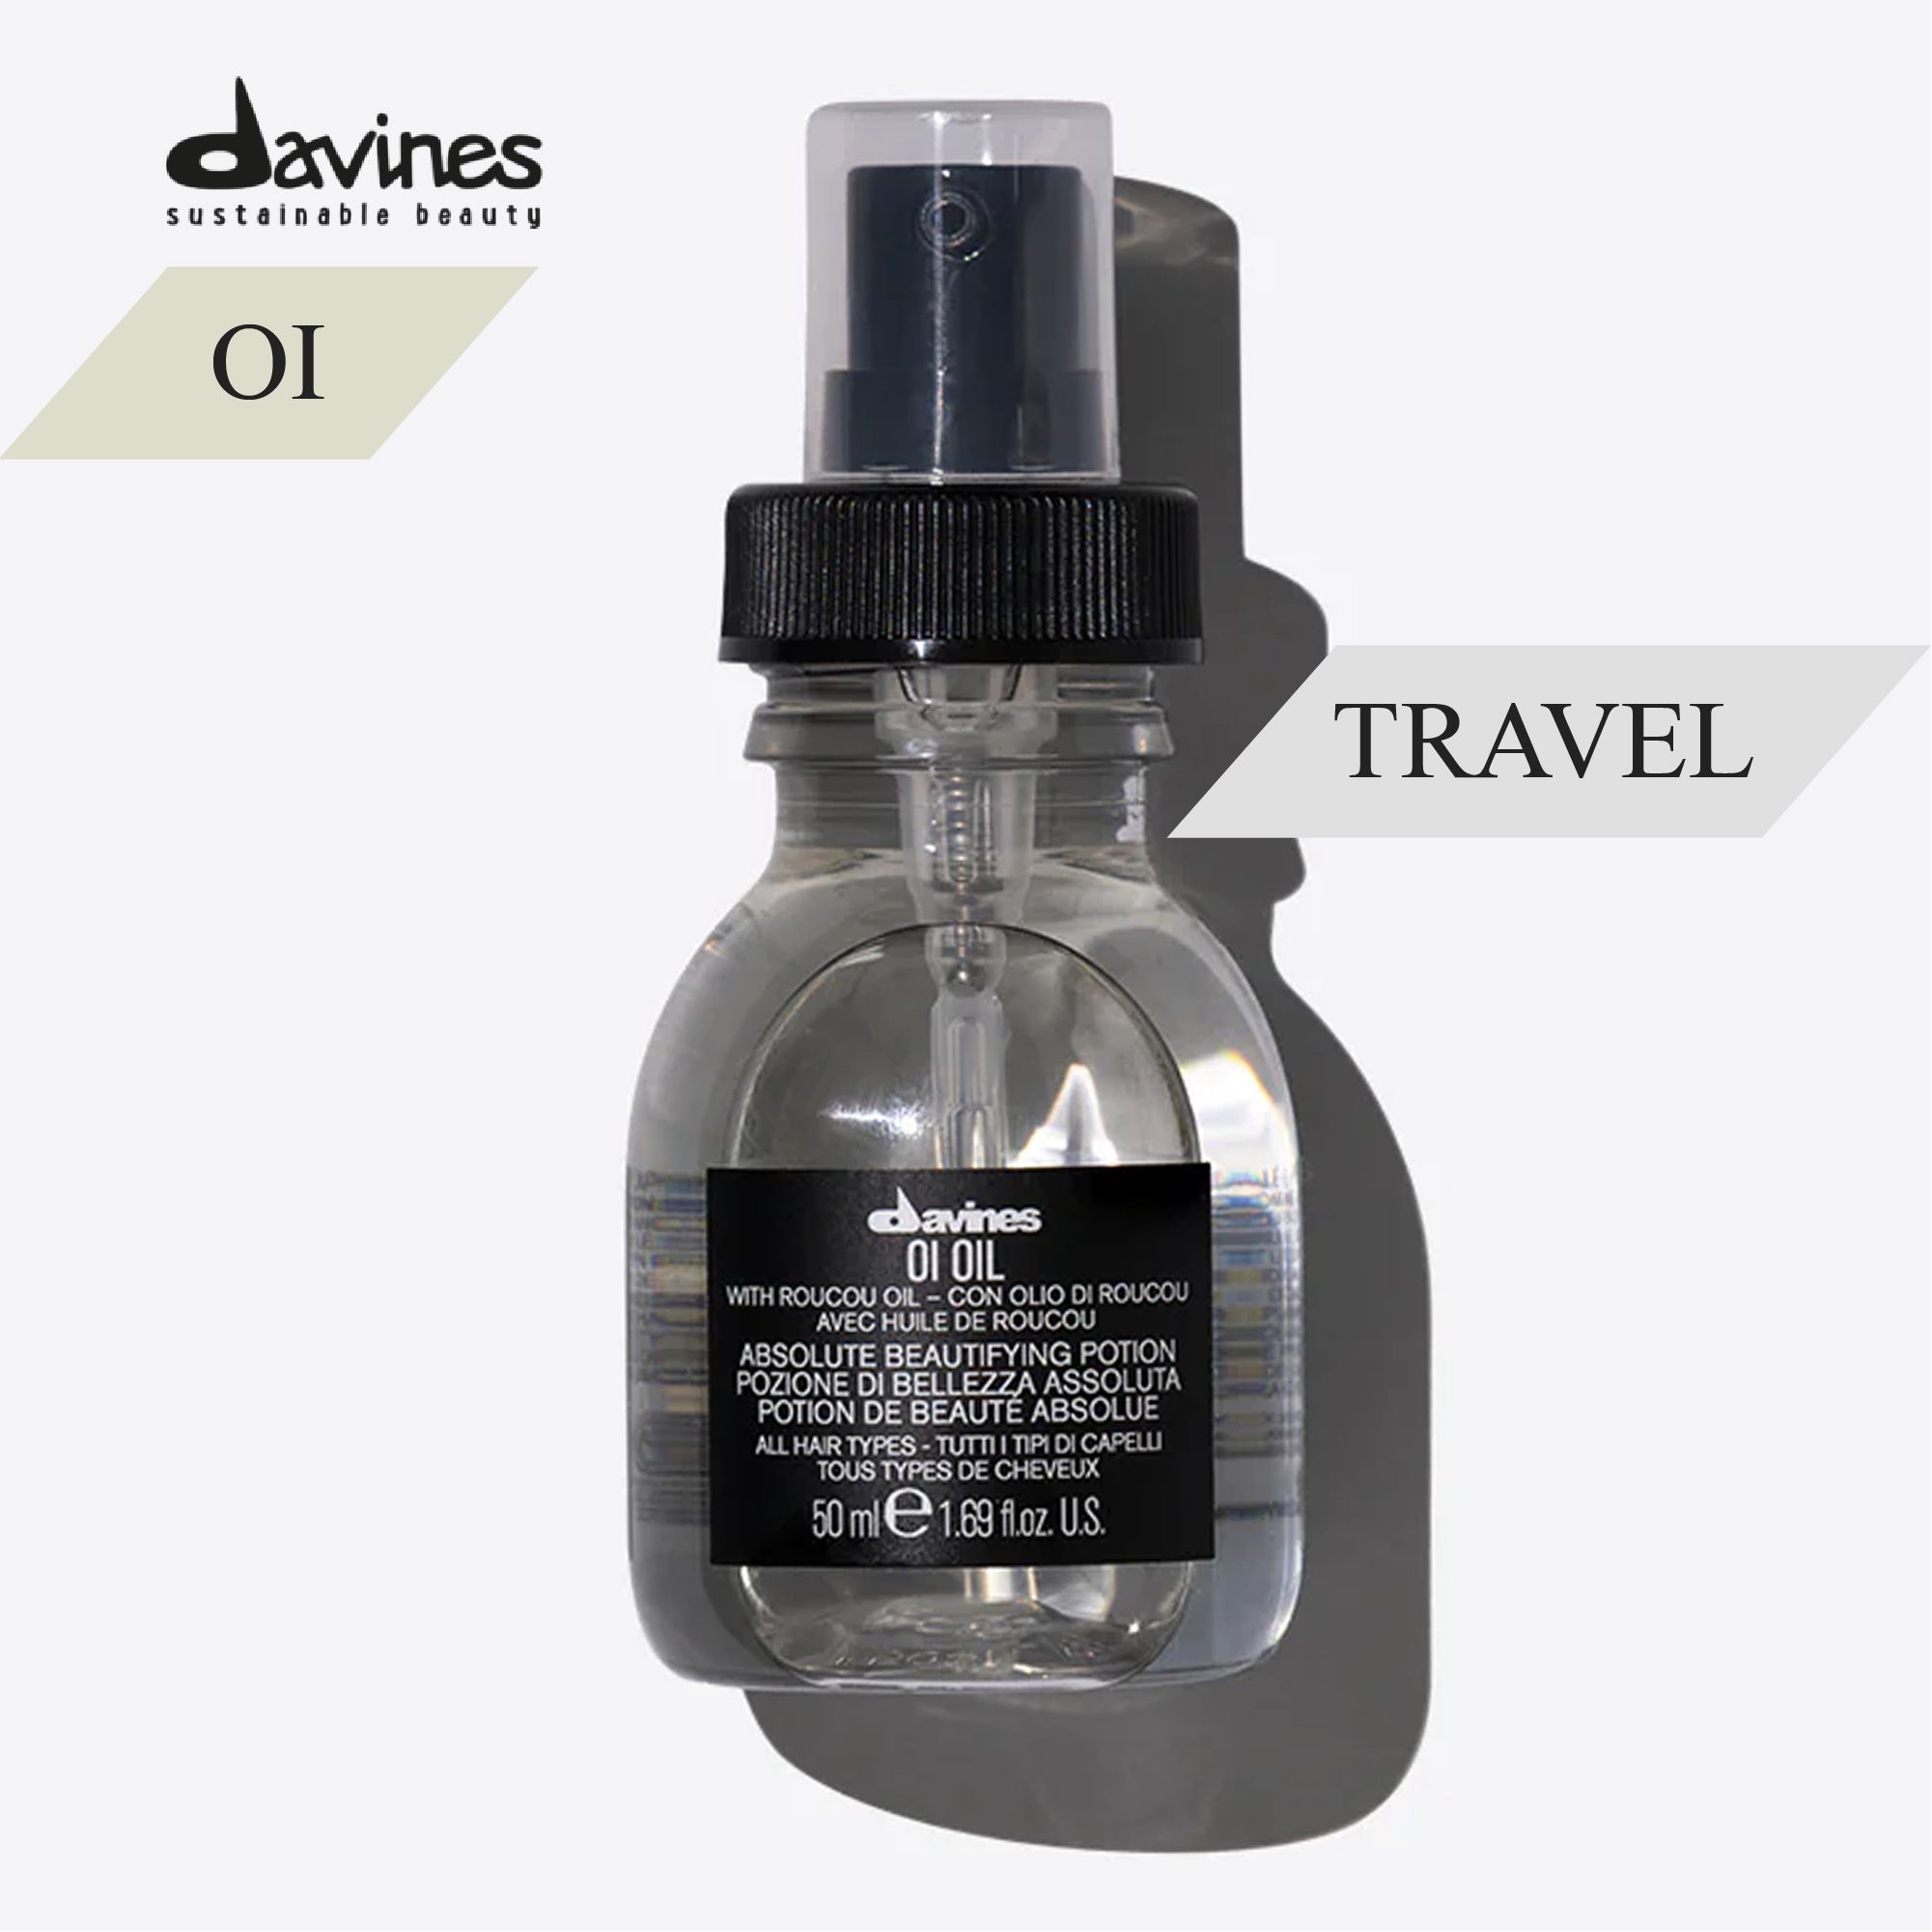 Davines absolute beautifying. Oi/Oil, absolute Beautifying Potion- масло для абсолютной красоты волос 50мл. Oi Oil Davines масло. Davines масло для абсолютной красоты волос oi Oil, absolute Beautifying Potion, 50мл. Масло Davines Oil "absolute Beautifying Potion" для абсолютной красоты волос 50 мл.